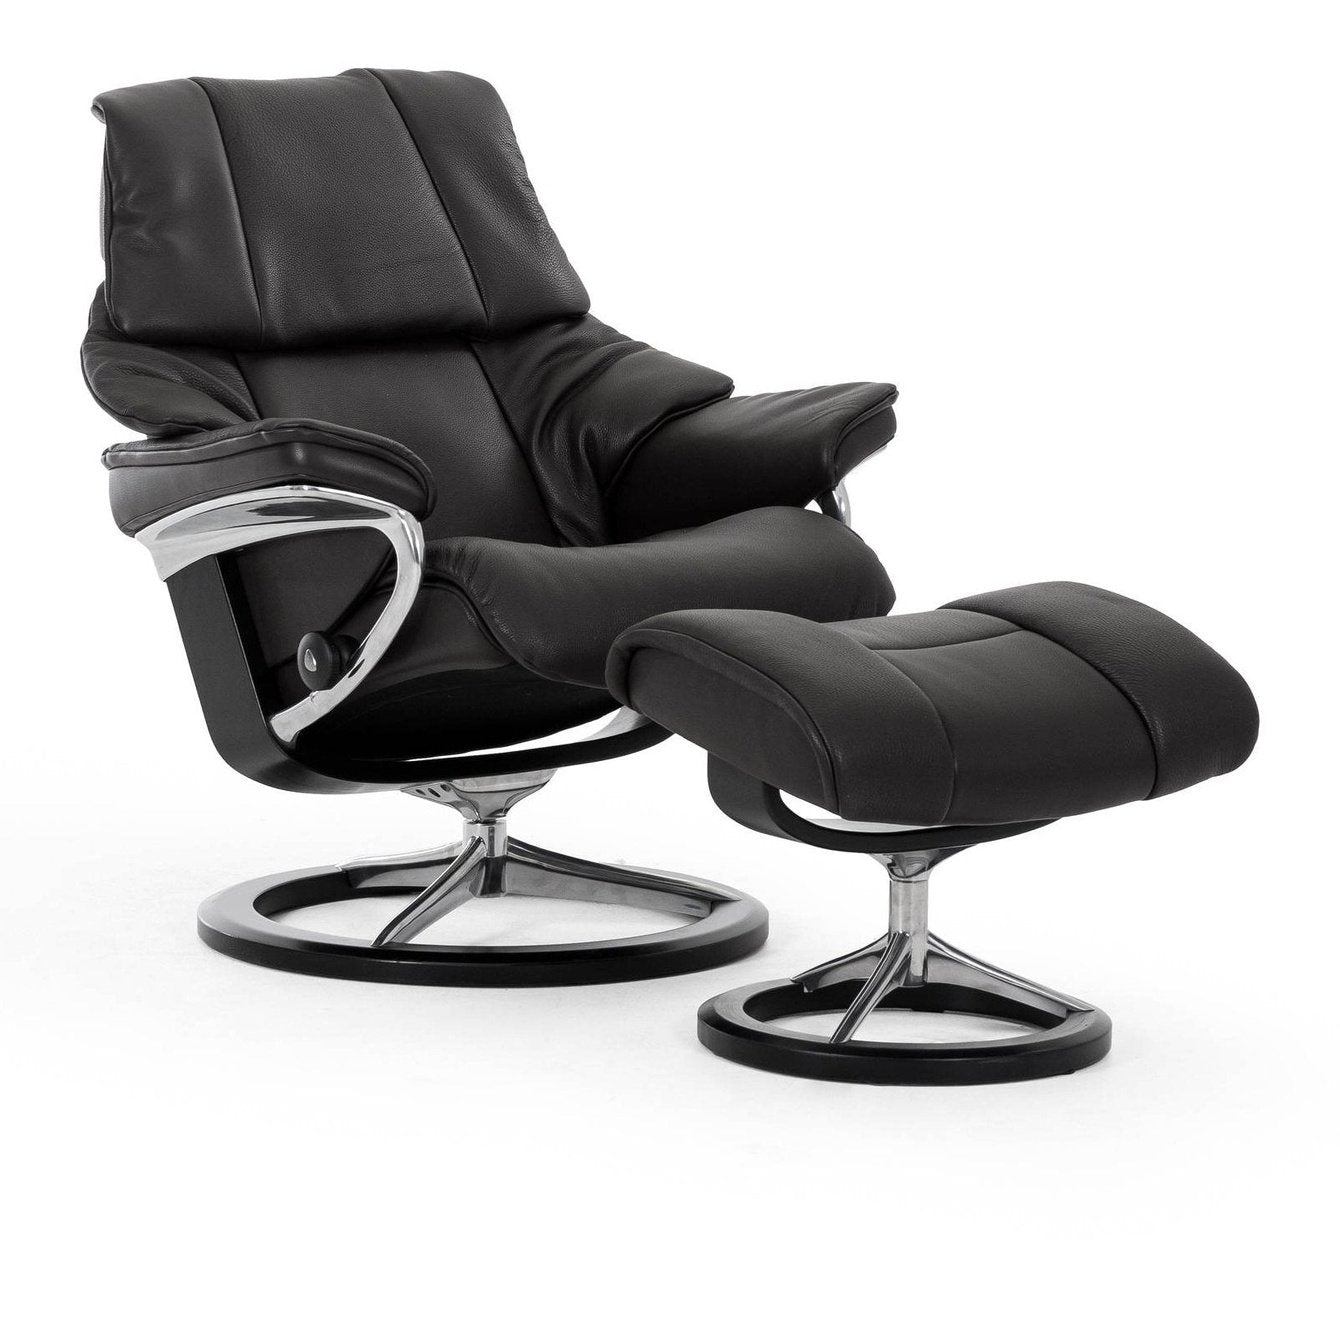 Stressless Reno Large Recliner with Stool